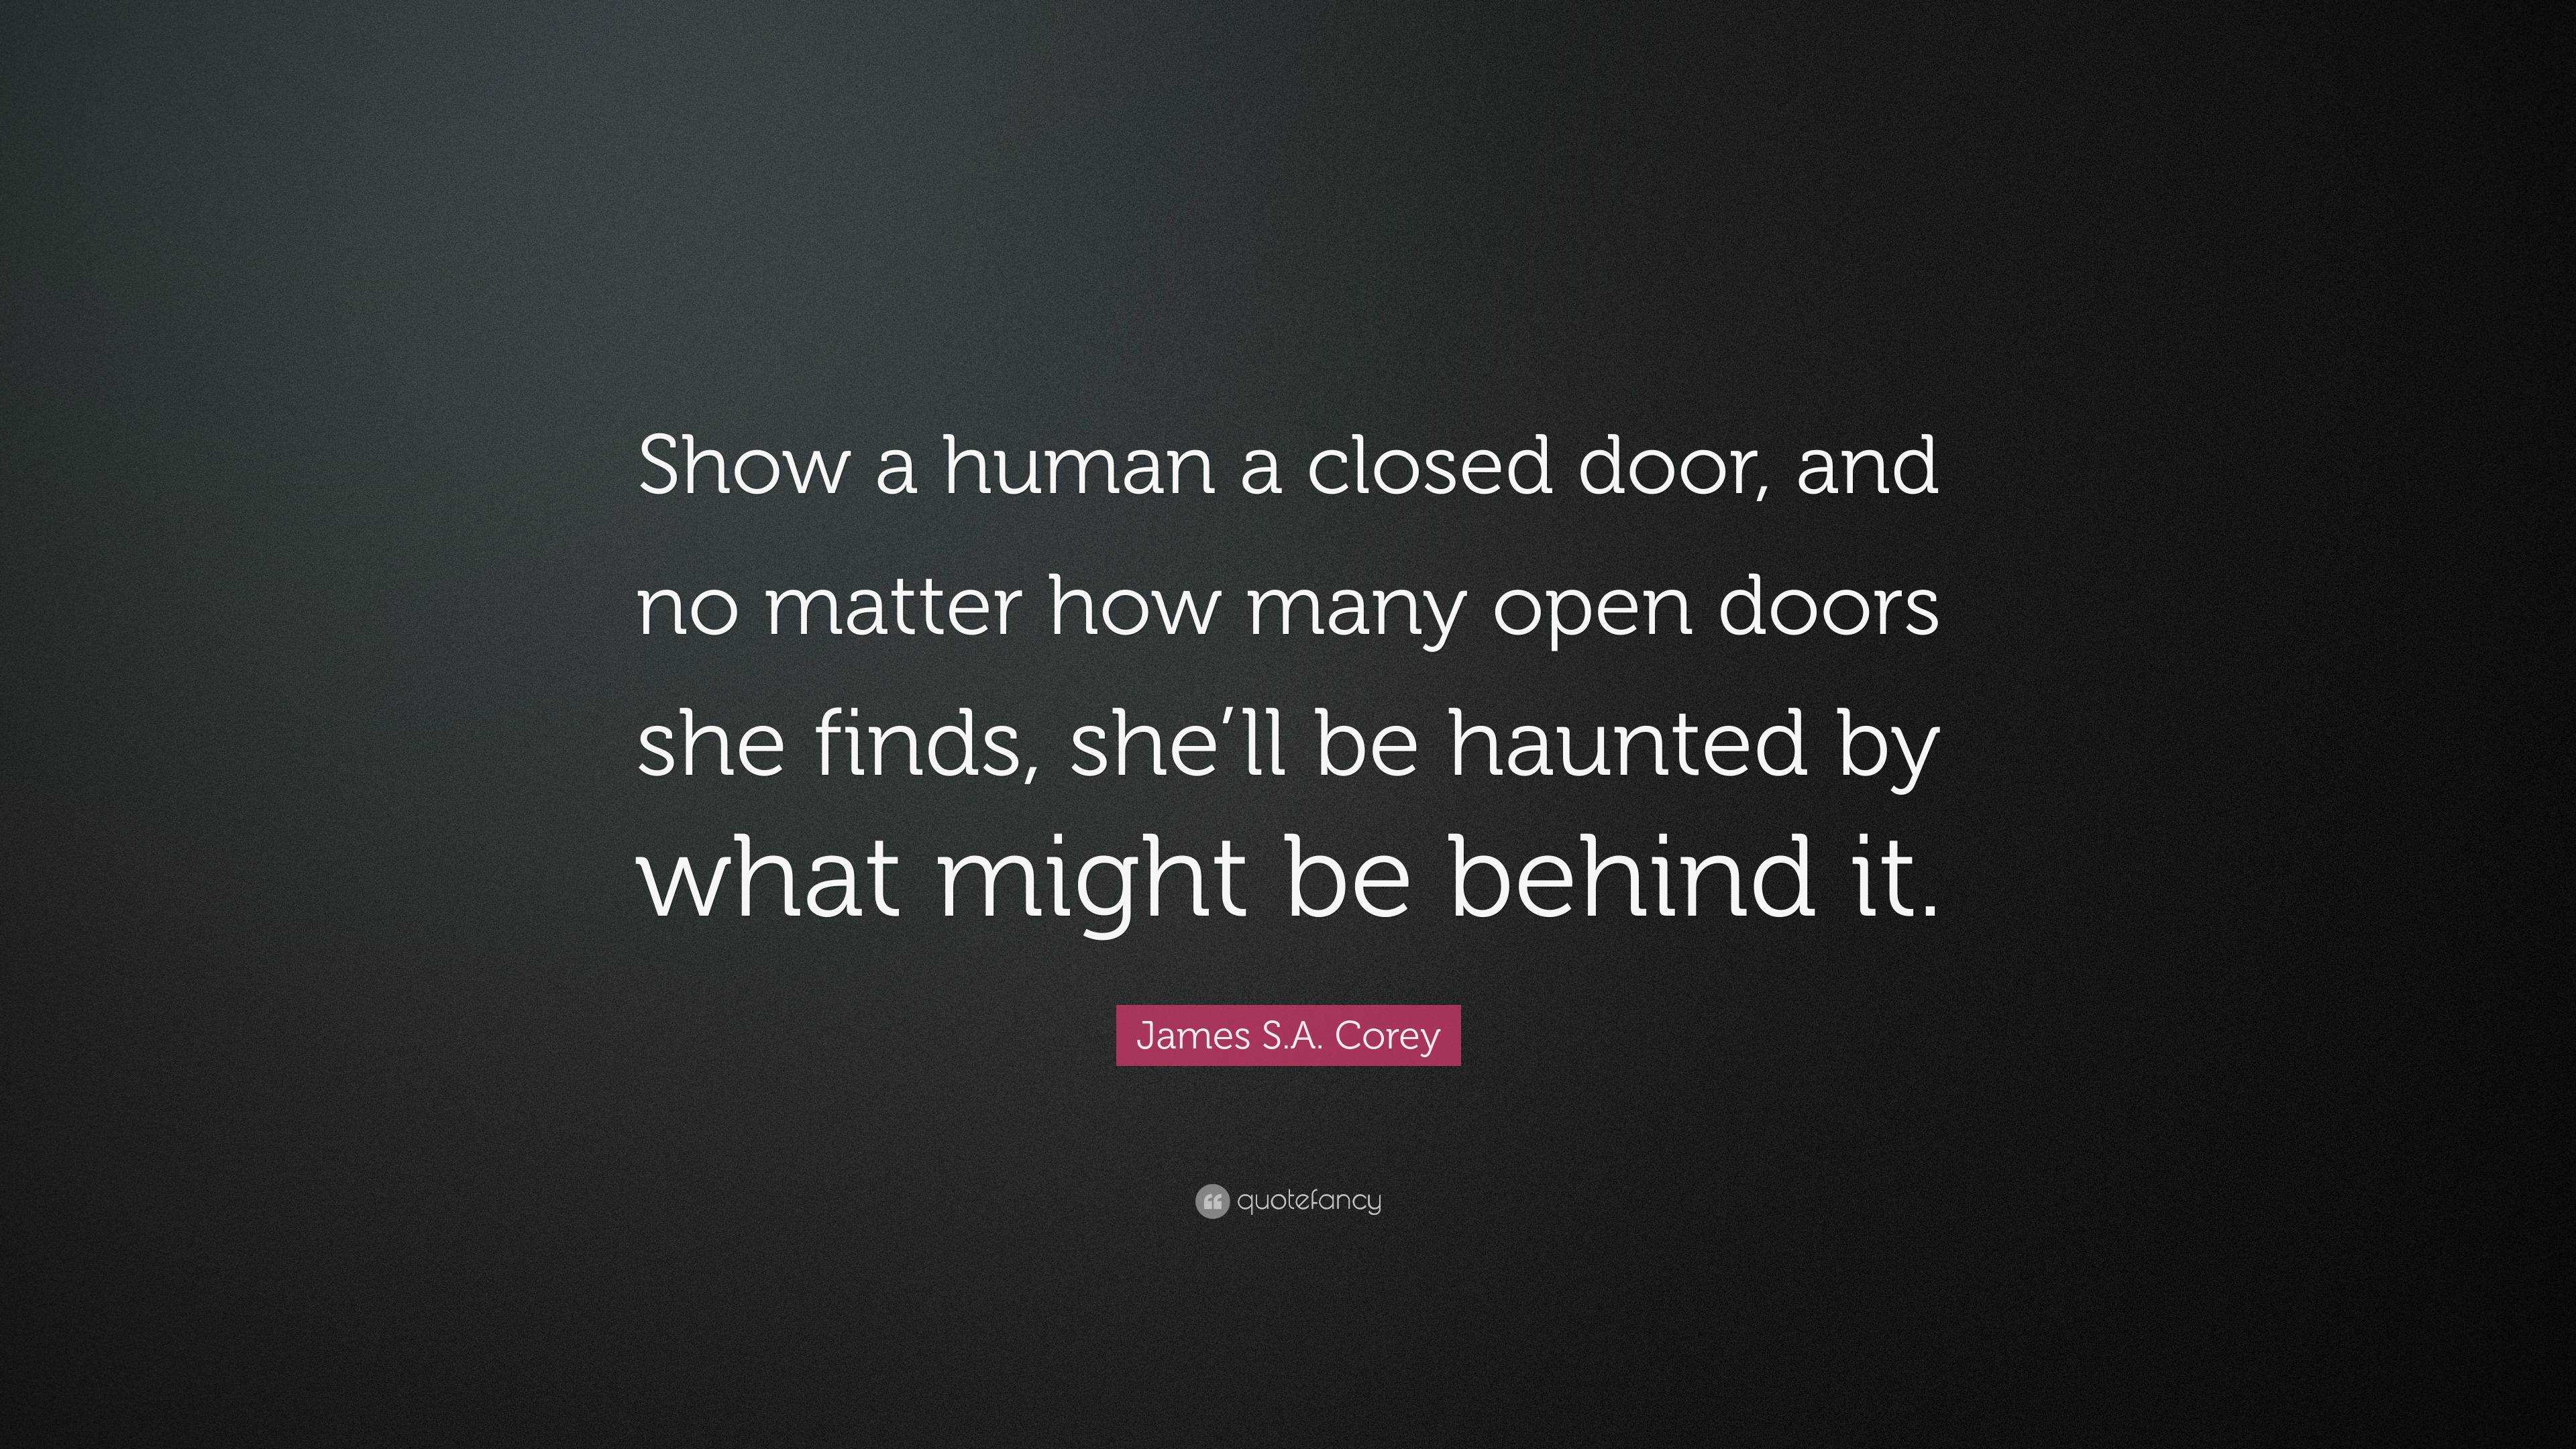 James S.A. Corey Quote: “Show a human a closed door, and no matter how ...